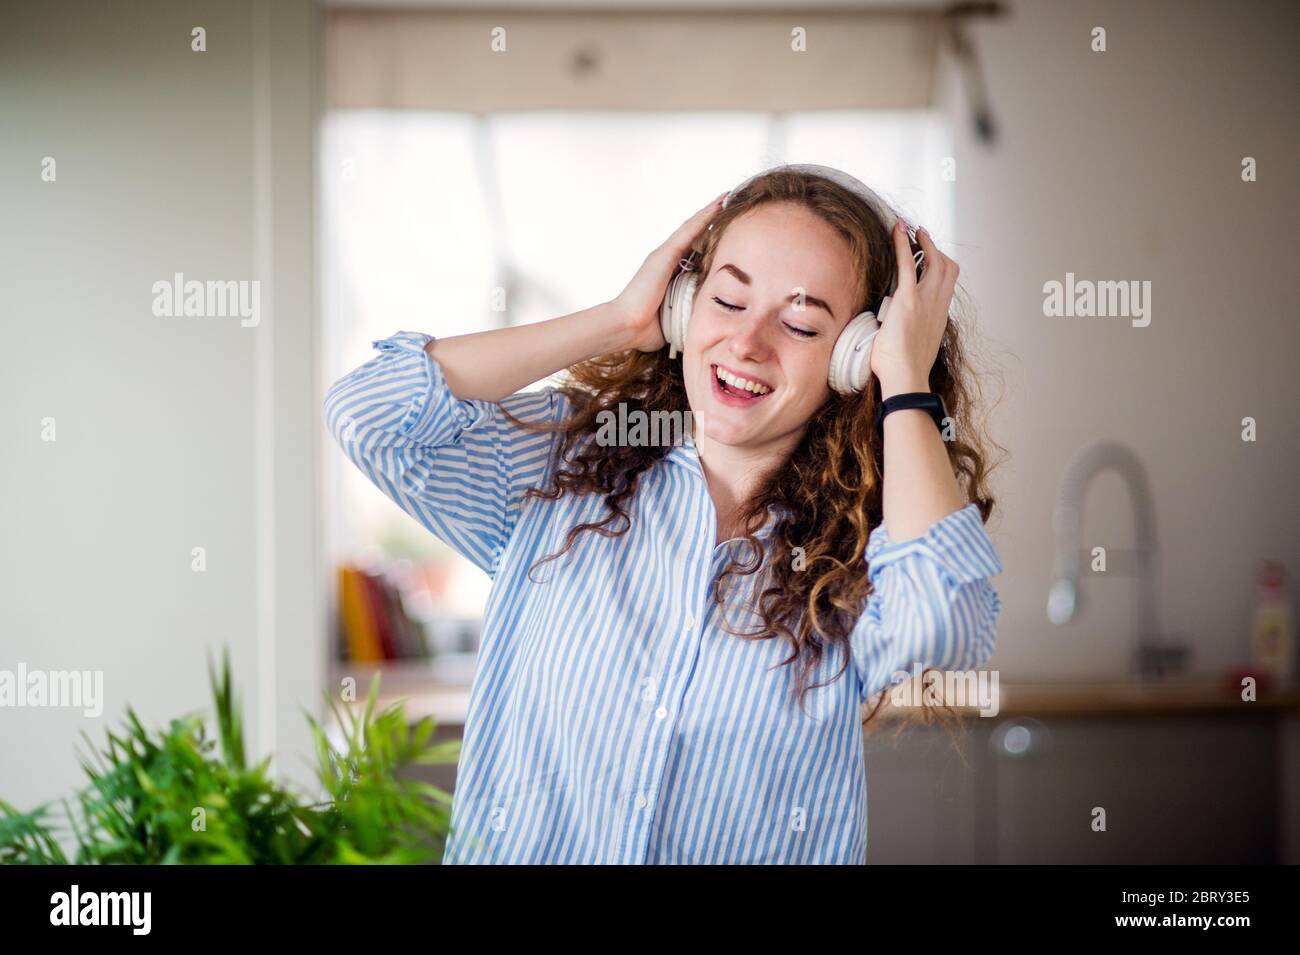 Young woman with headphones relaxing indoors at home. Stock Photo